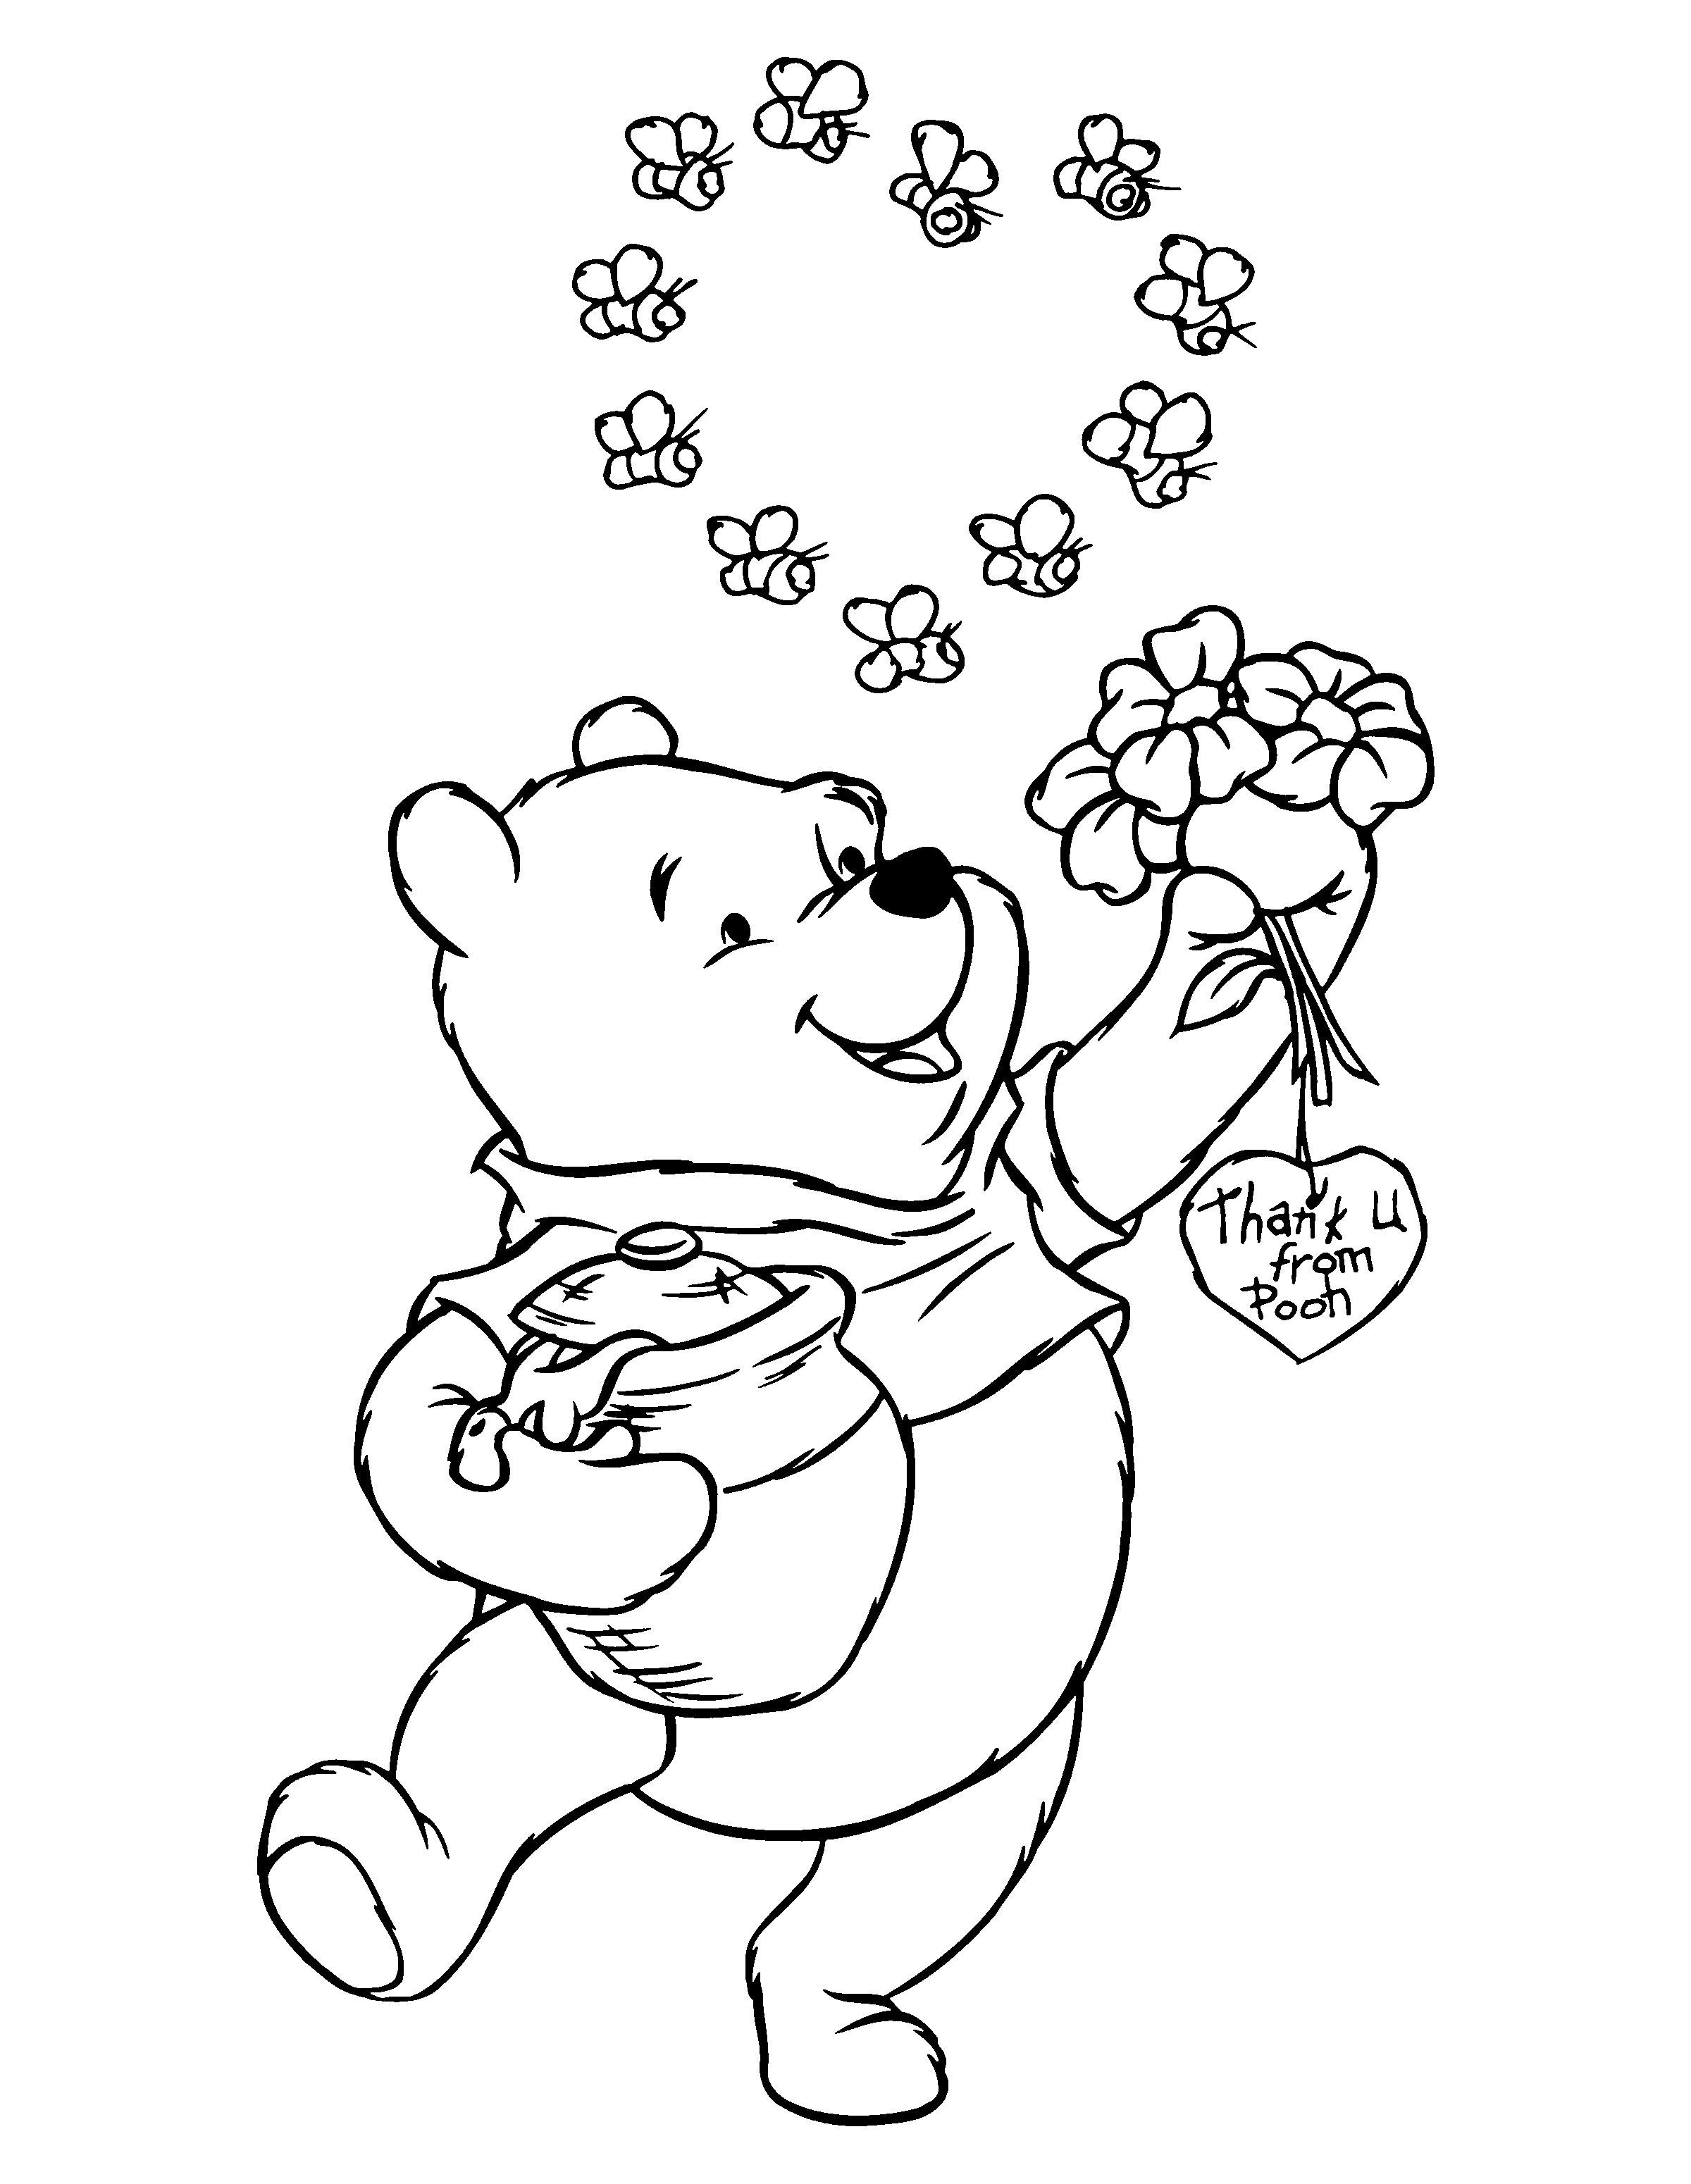 Free Coloring Pages Winnie The Pooh Classic Download Free Coloring